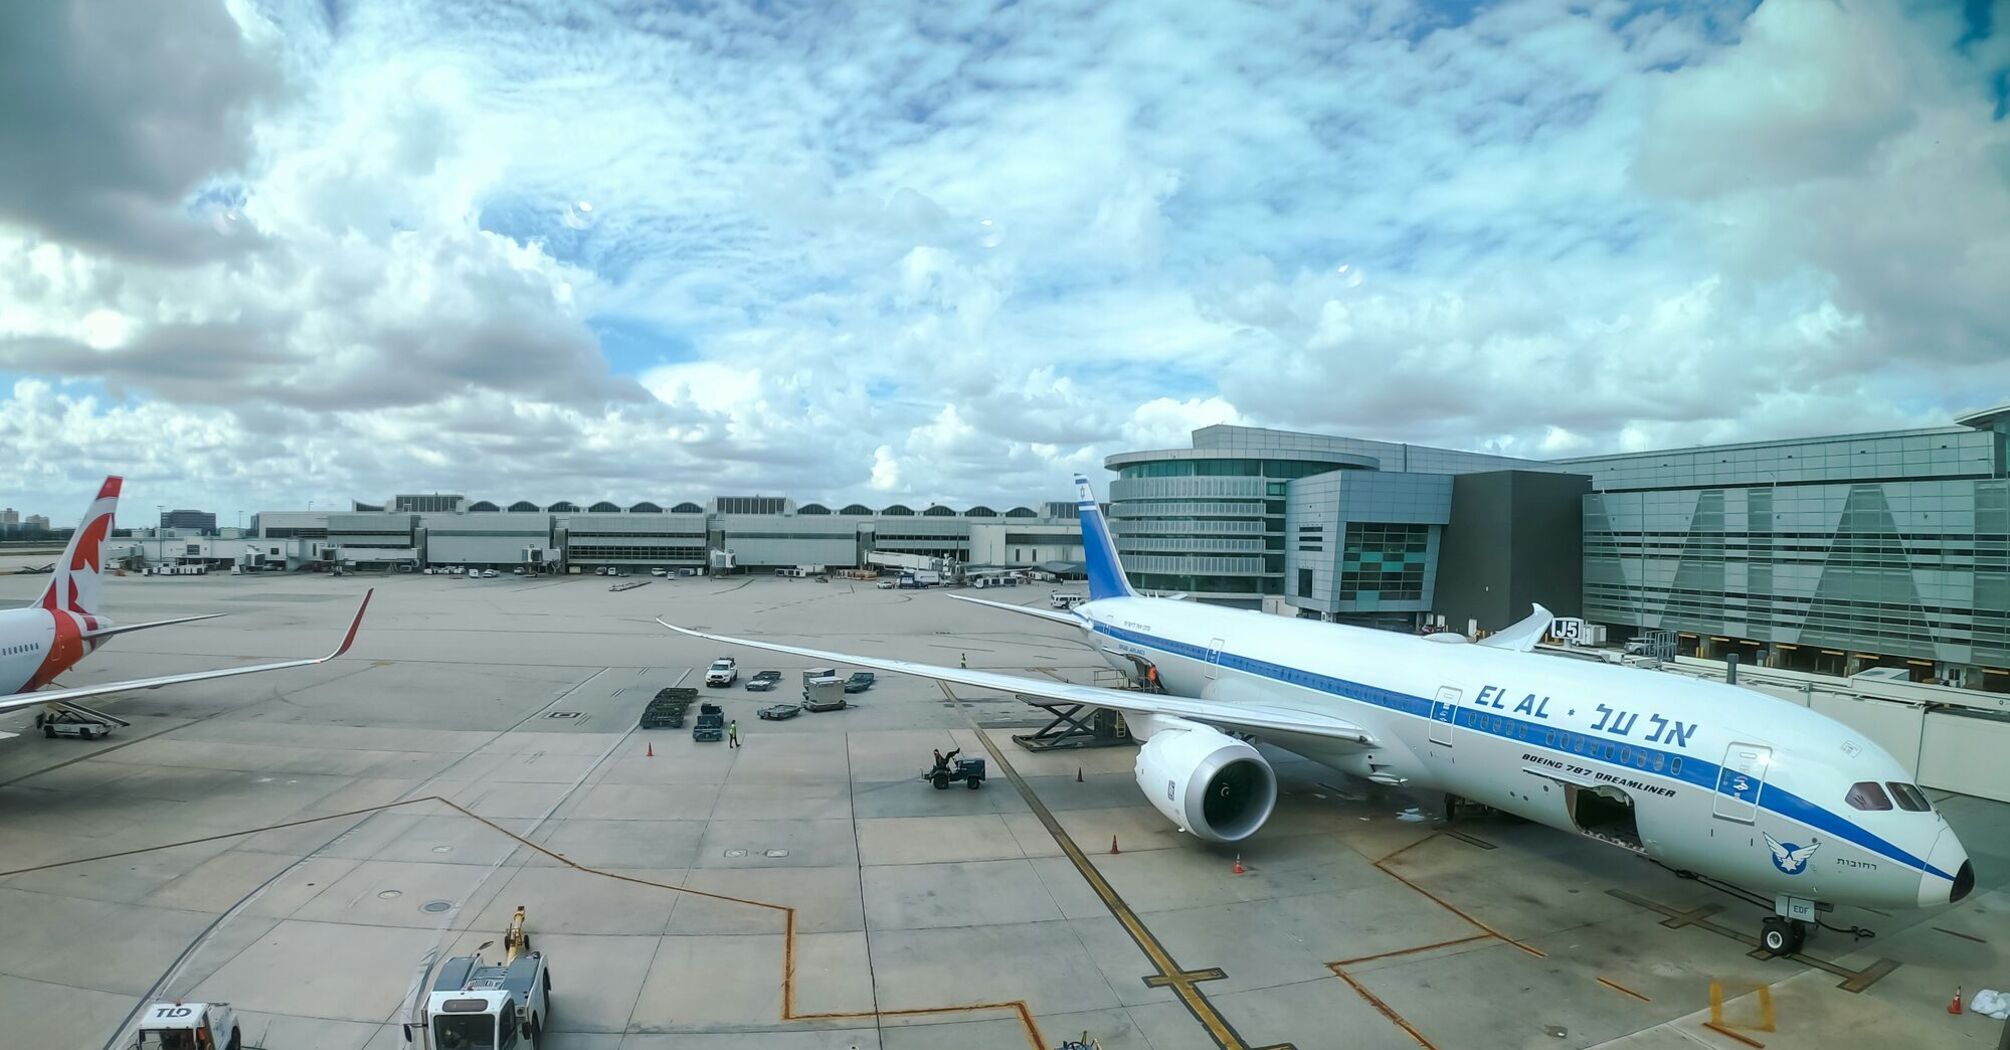 View of Miami International Airport with El Al aircraft at the gate and service vehicles on the tarmac, under a partly cloudy sky